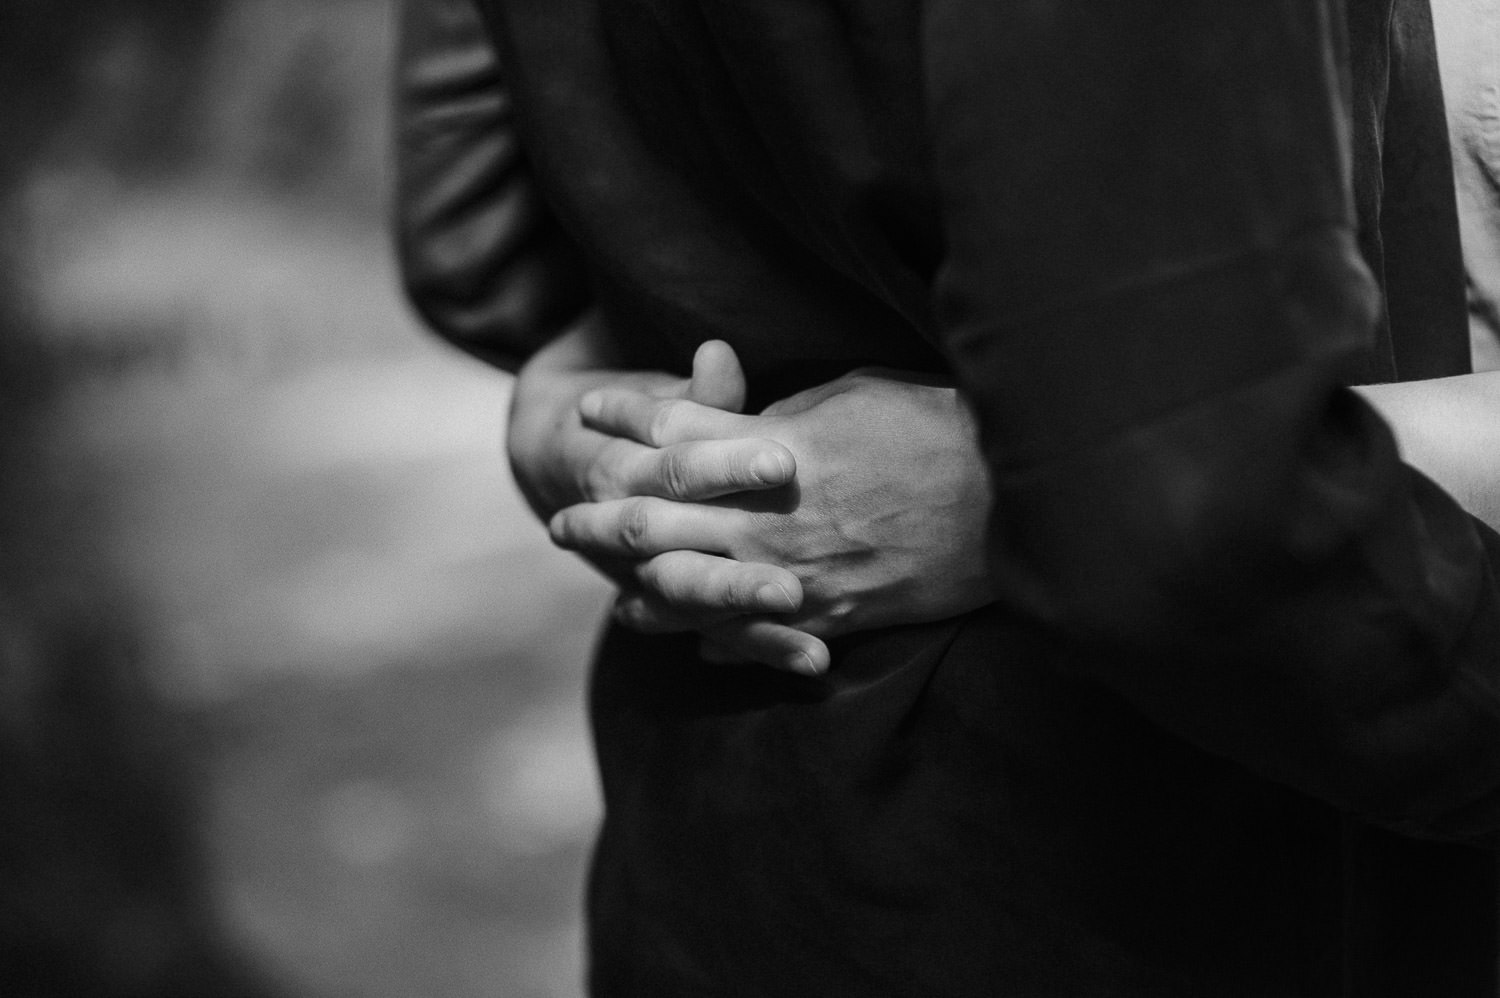 engagement shoot detail of couple's hands